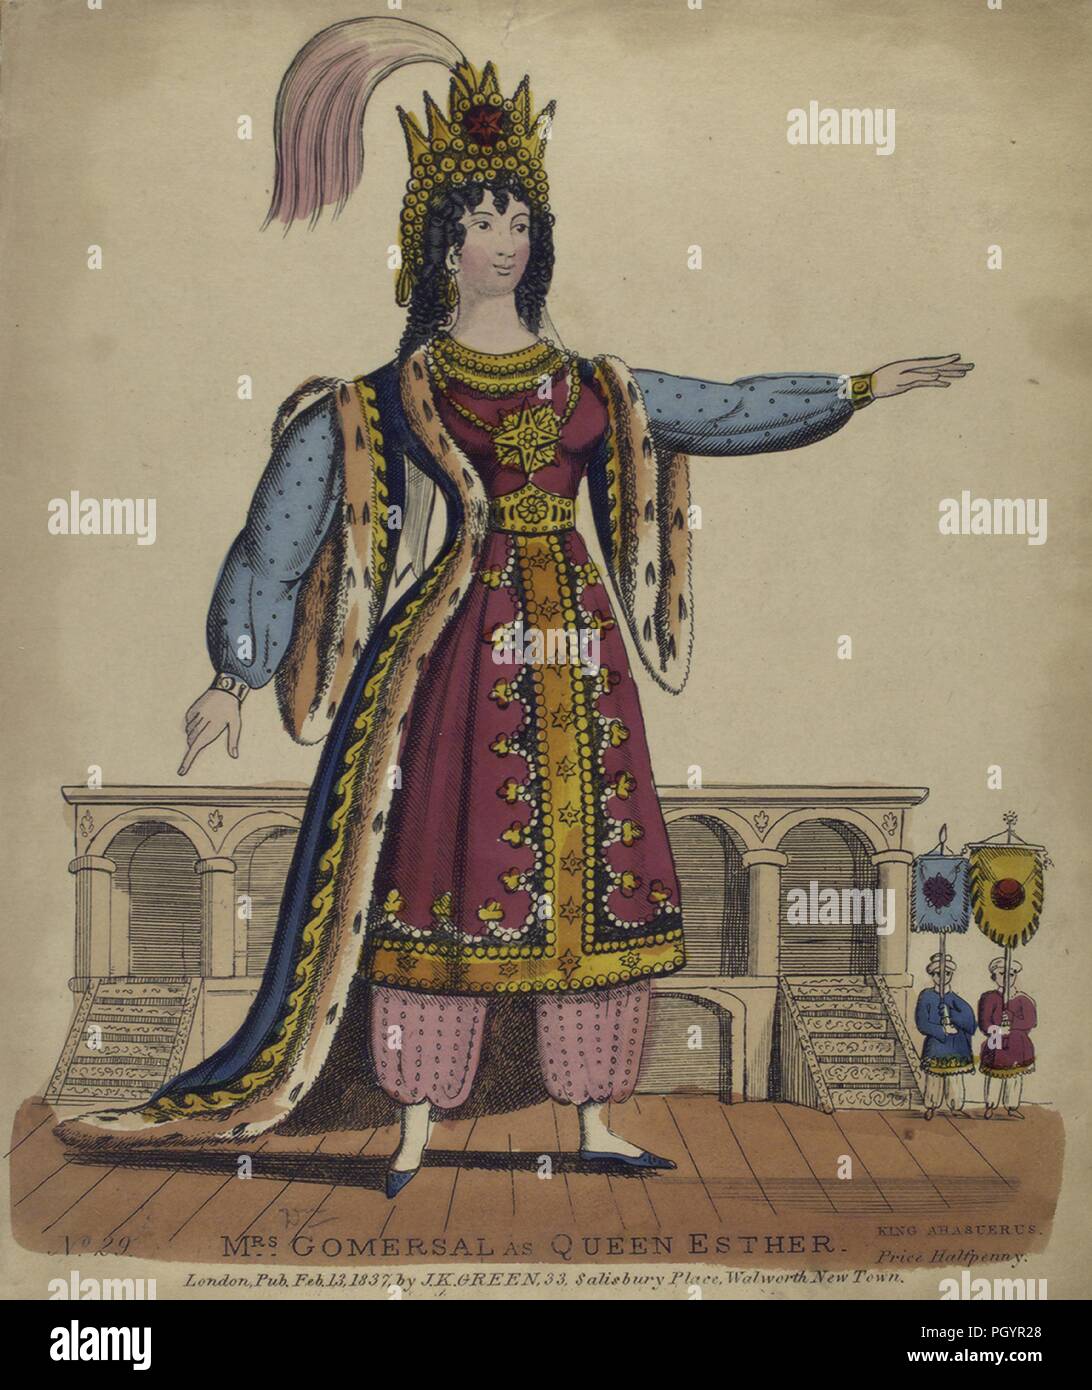 Color print, likely a watercolour tinsel print, hand-painted, and decorated with scraps of tinsel and other materials, depicting a full-length portrait of British actress Mrs Alexander E Gomersal, with a calm look on her face, extending one arm at shoulder level, dressed in a tunic, pantaloons, coat with ermine trim, and a crown with a feather or horse-tail, while performing the role of Queen Esther, from the play 'King Ahasuerus, ' published in London by JK Green, 1837. From the New York Public Library. () Stock Photo